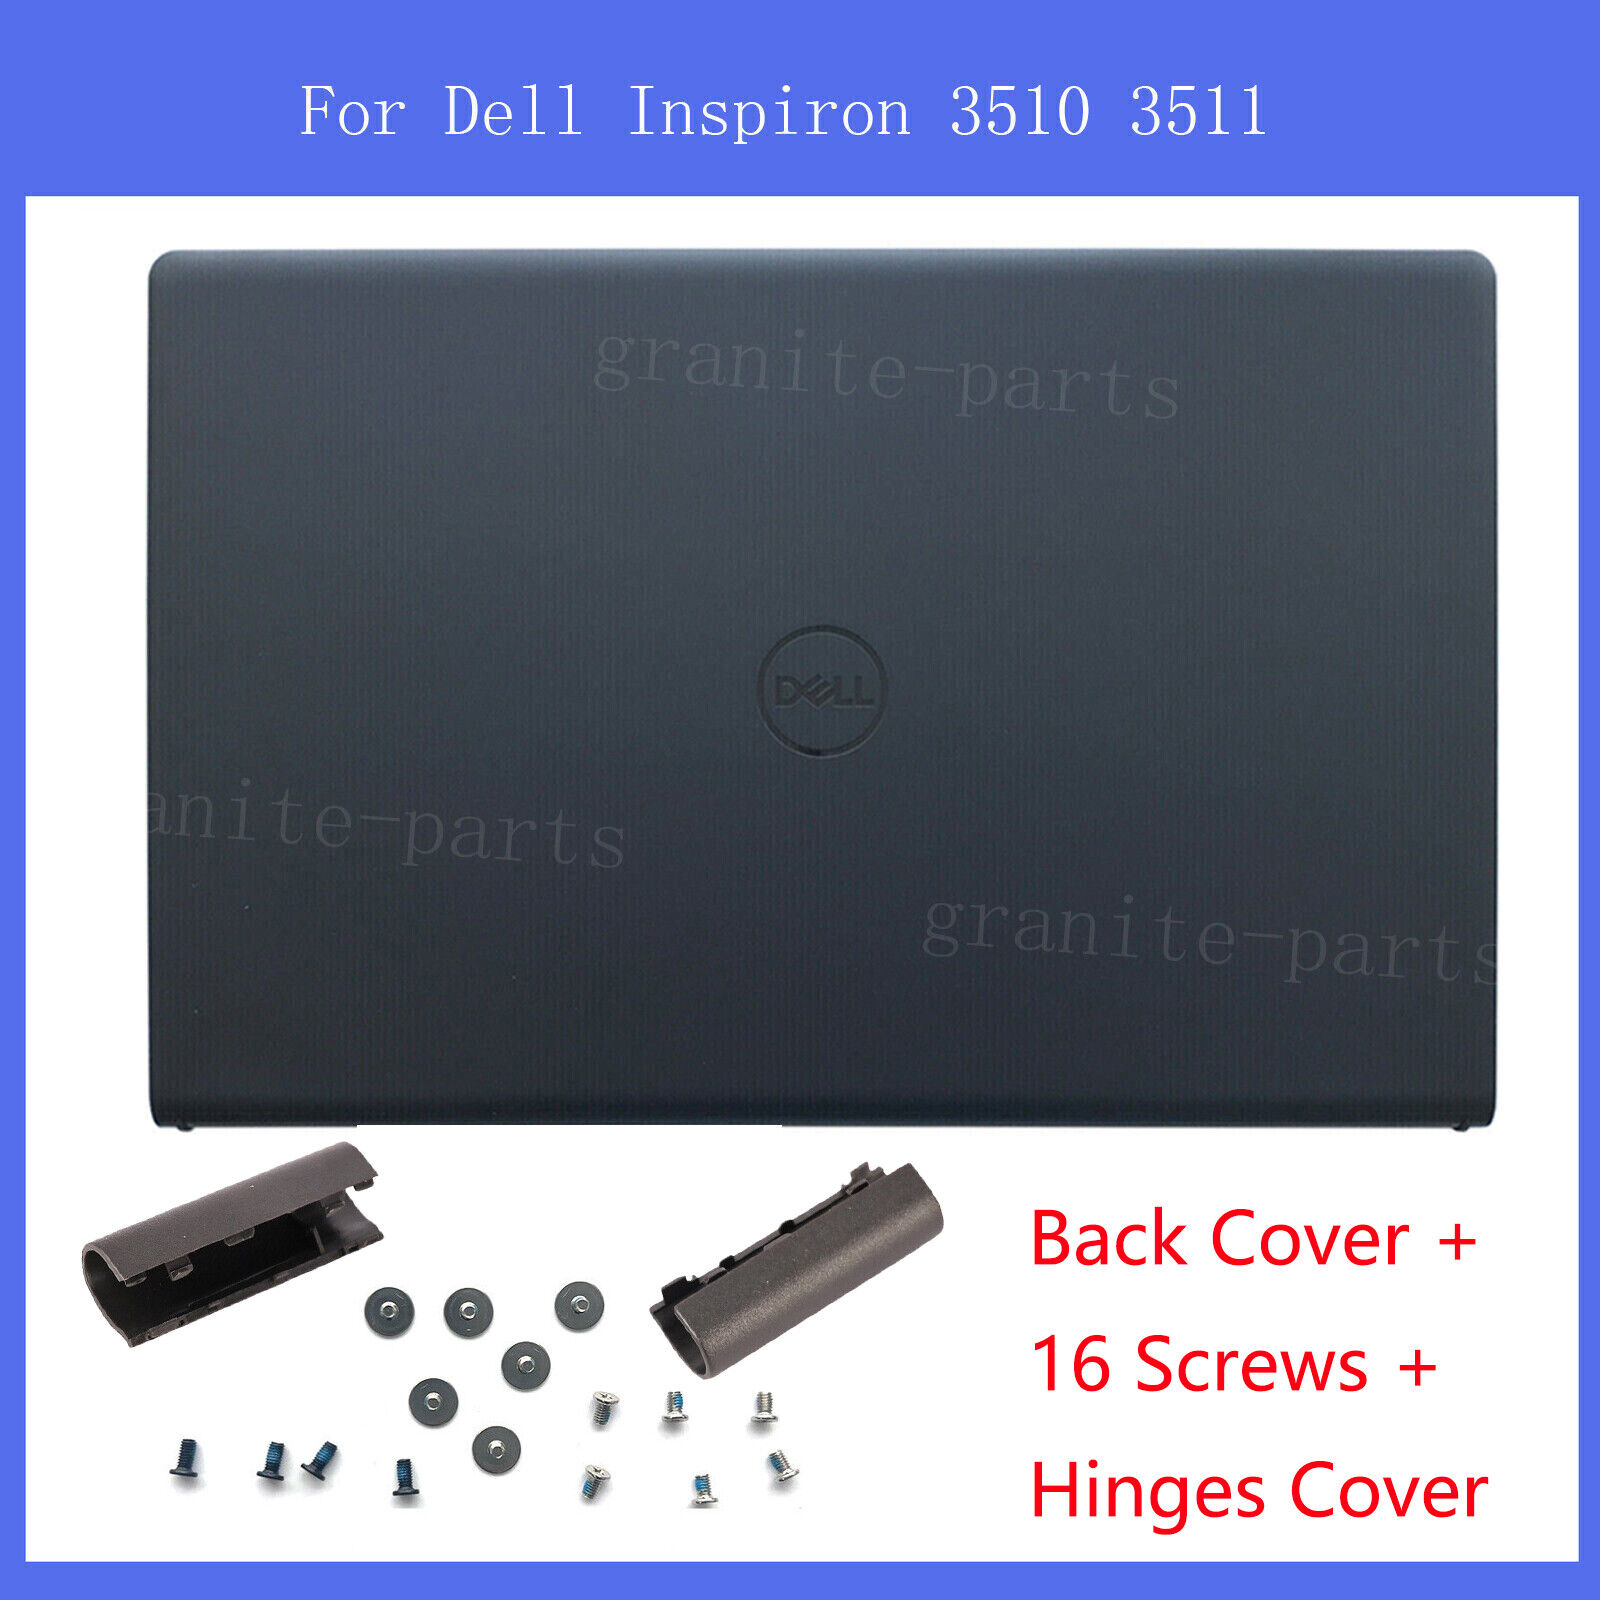 LCD Back Cover/Bezel/Hinges Cover For Dell Inspiron 15 3510 3511 3515 3520 3525